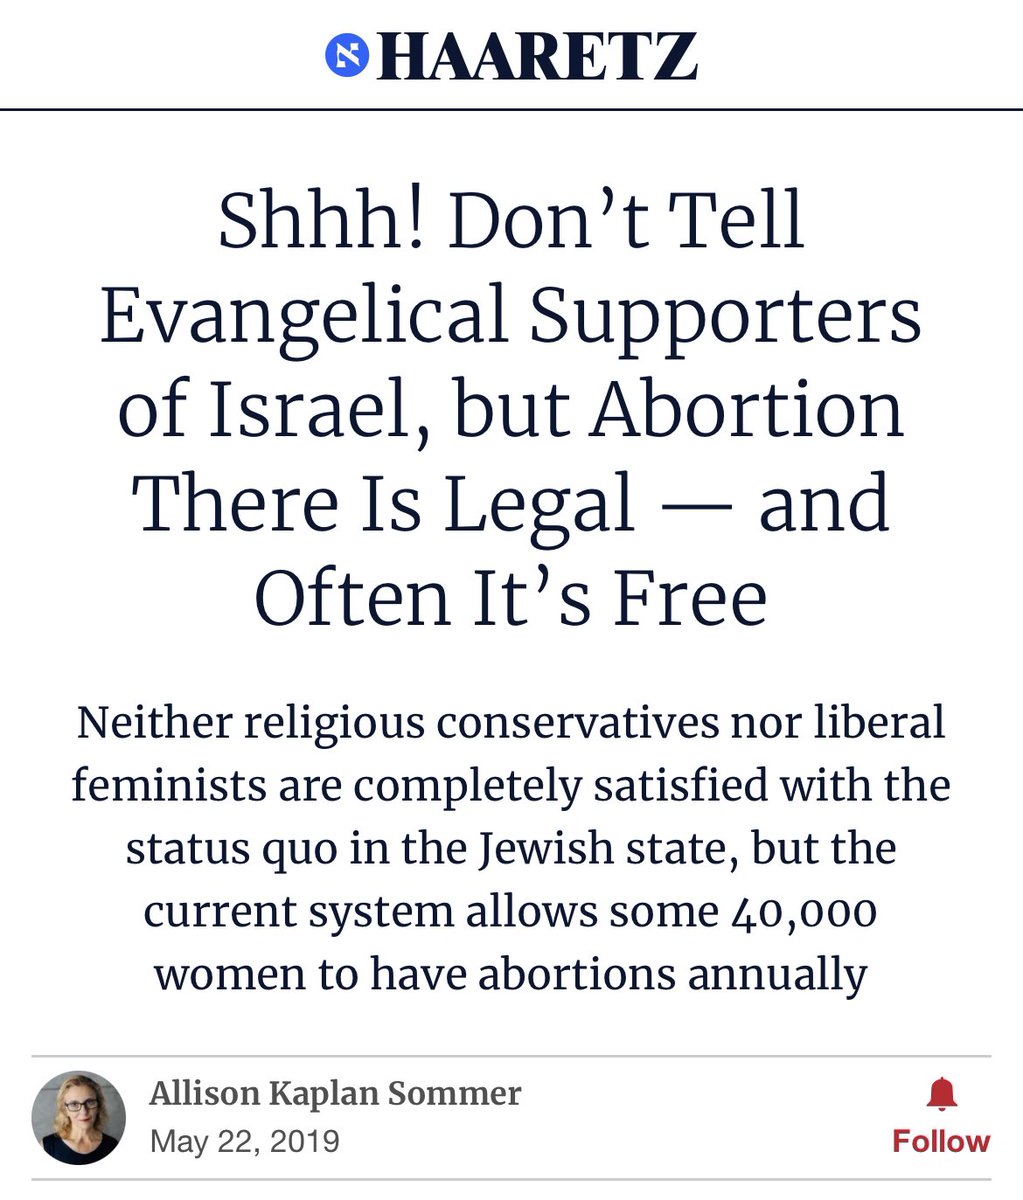 Israel pays for abortions. Gaza banned them. Not one conservative of prominence truly believes, “Abortion is murder.” That’s all big mouth talk. Otherwise they’d confront this head on. It would present a major moral dilemma.